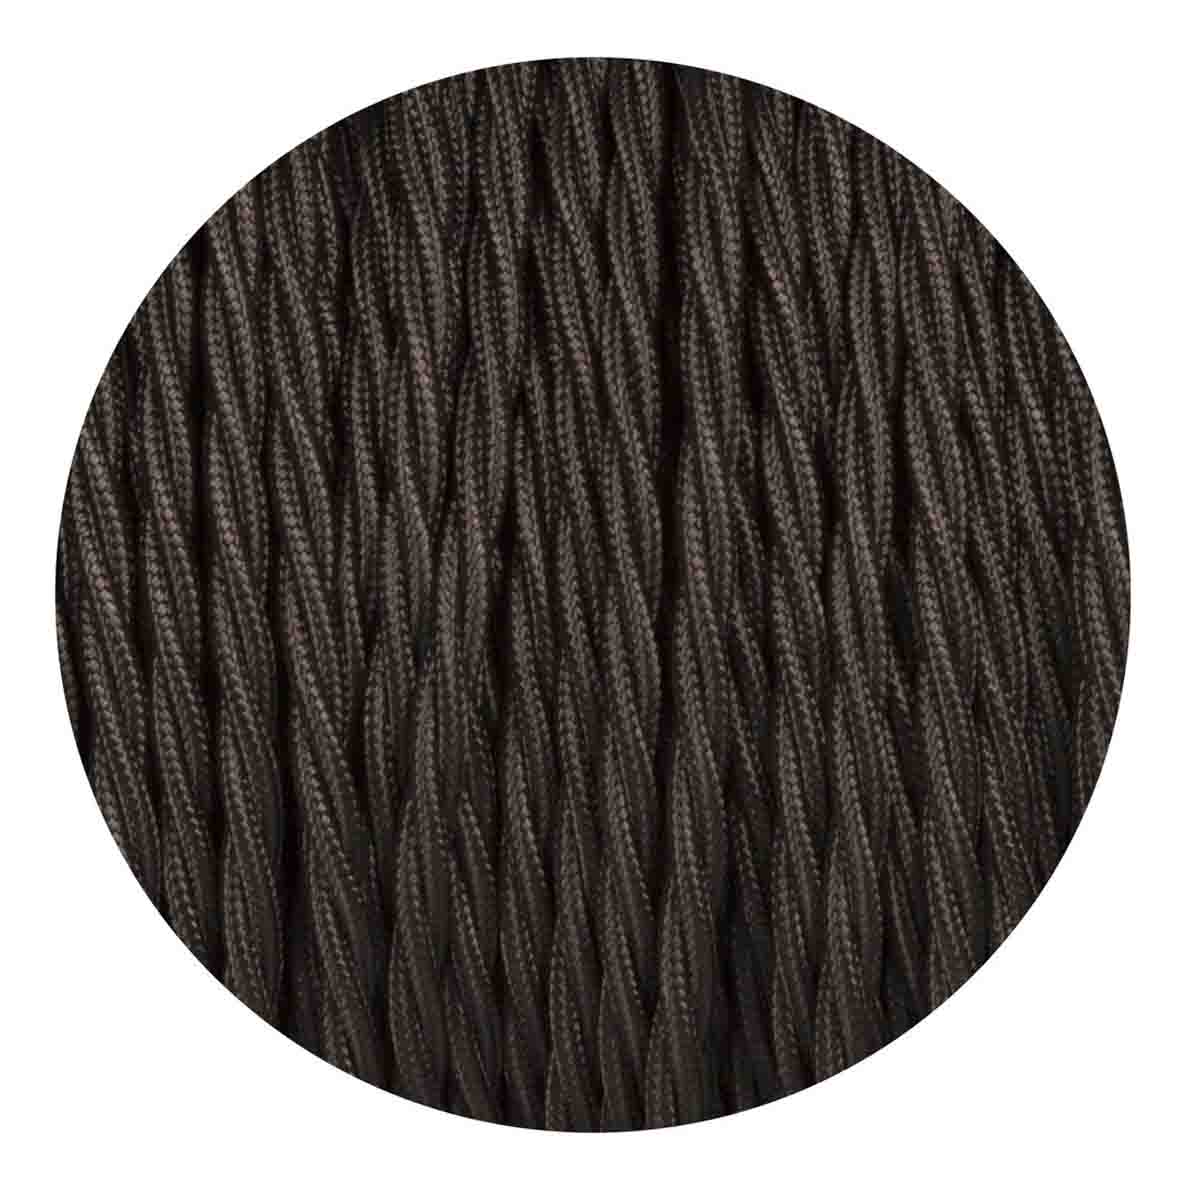 Black 3 Core Twisted Electric Cable covered fabric 0.75mm~1152 - LEDSone UK Ltd